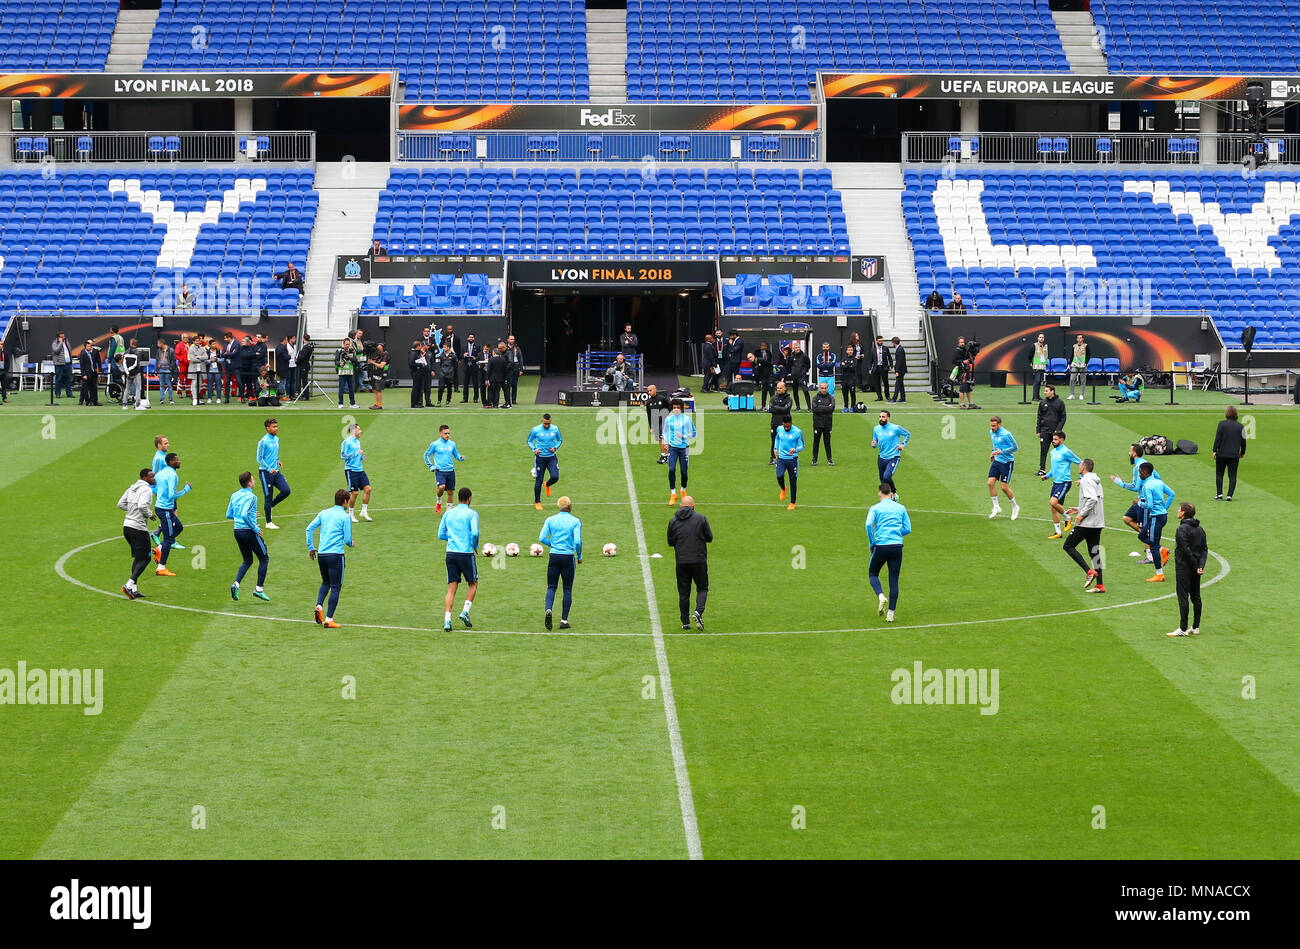 Olympique Marseille team warming up during a Marseille training session, prior to the Europa League final, at Parc Olympique Lyonnais on May 15th 2018 in Lyon, France. (Photo by Leila Coker/phcimages.com) Stock Photo